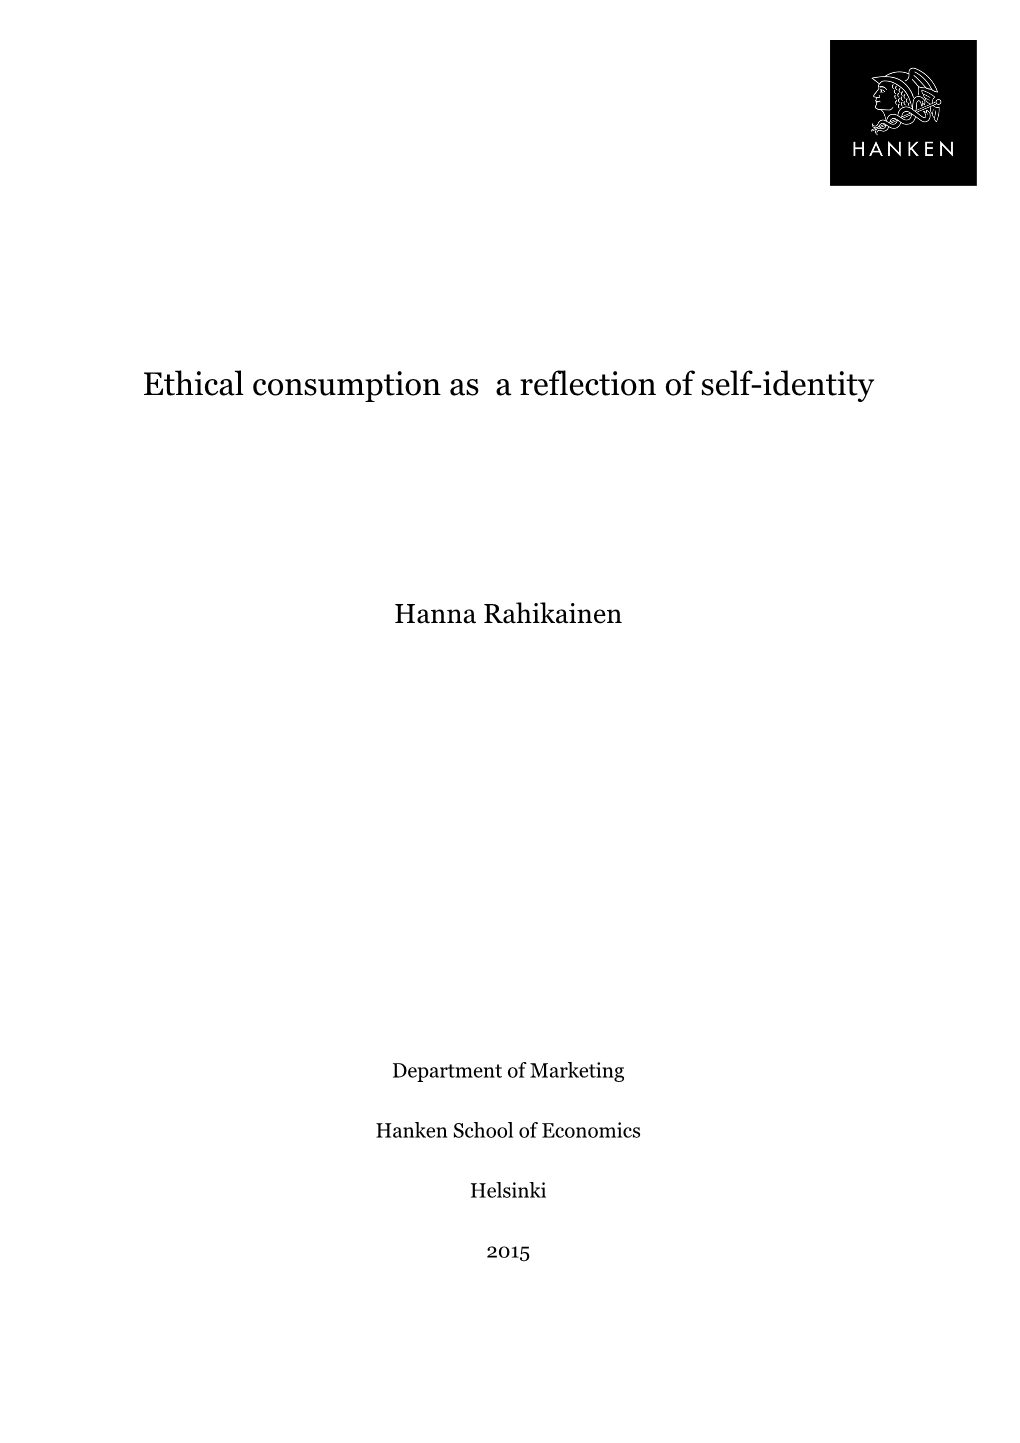 Ethical Consumption As a Reflection of Self-Identity